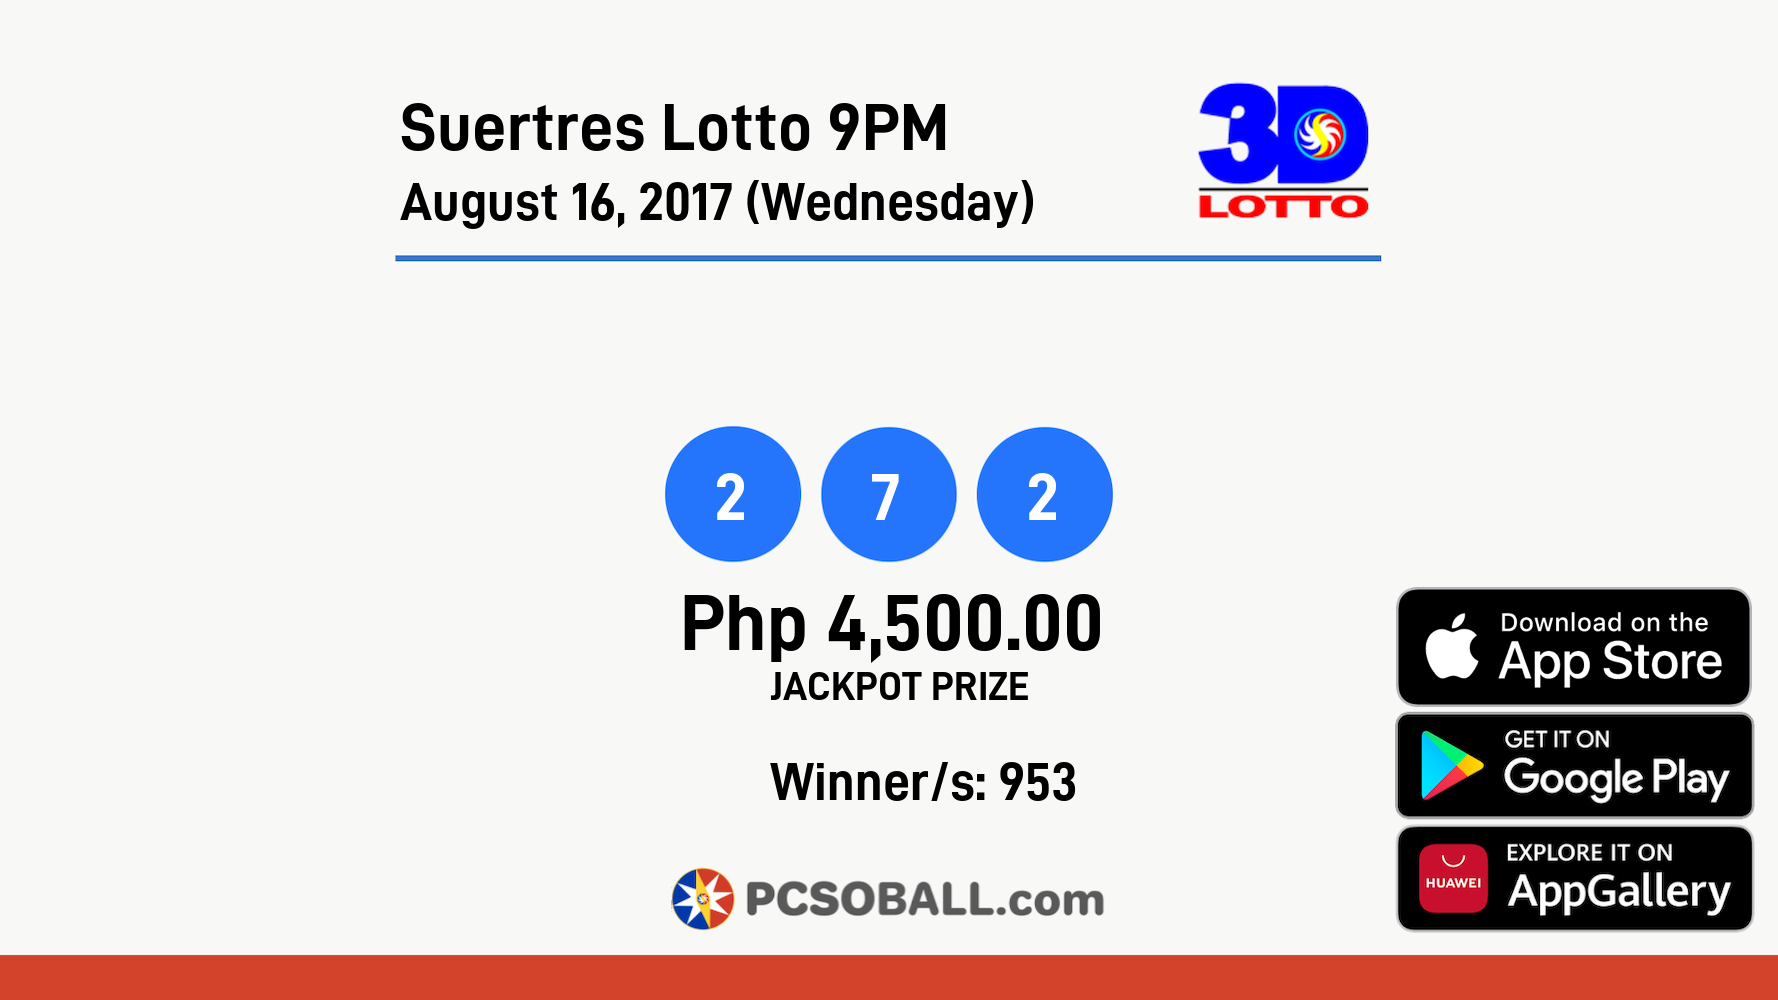 Suertres Lotto 9PM August 16, 2017 (Wednesday) Result